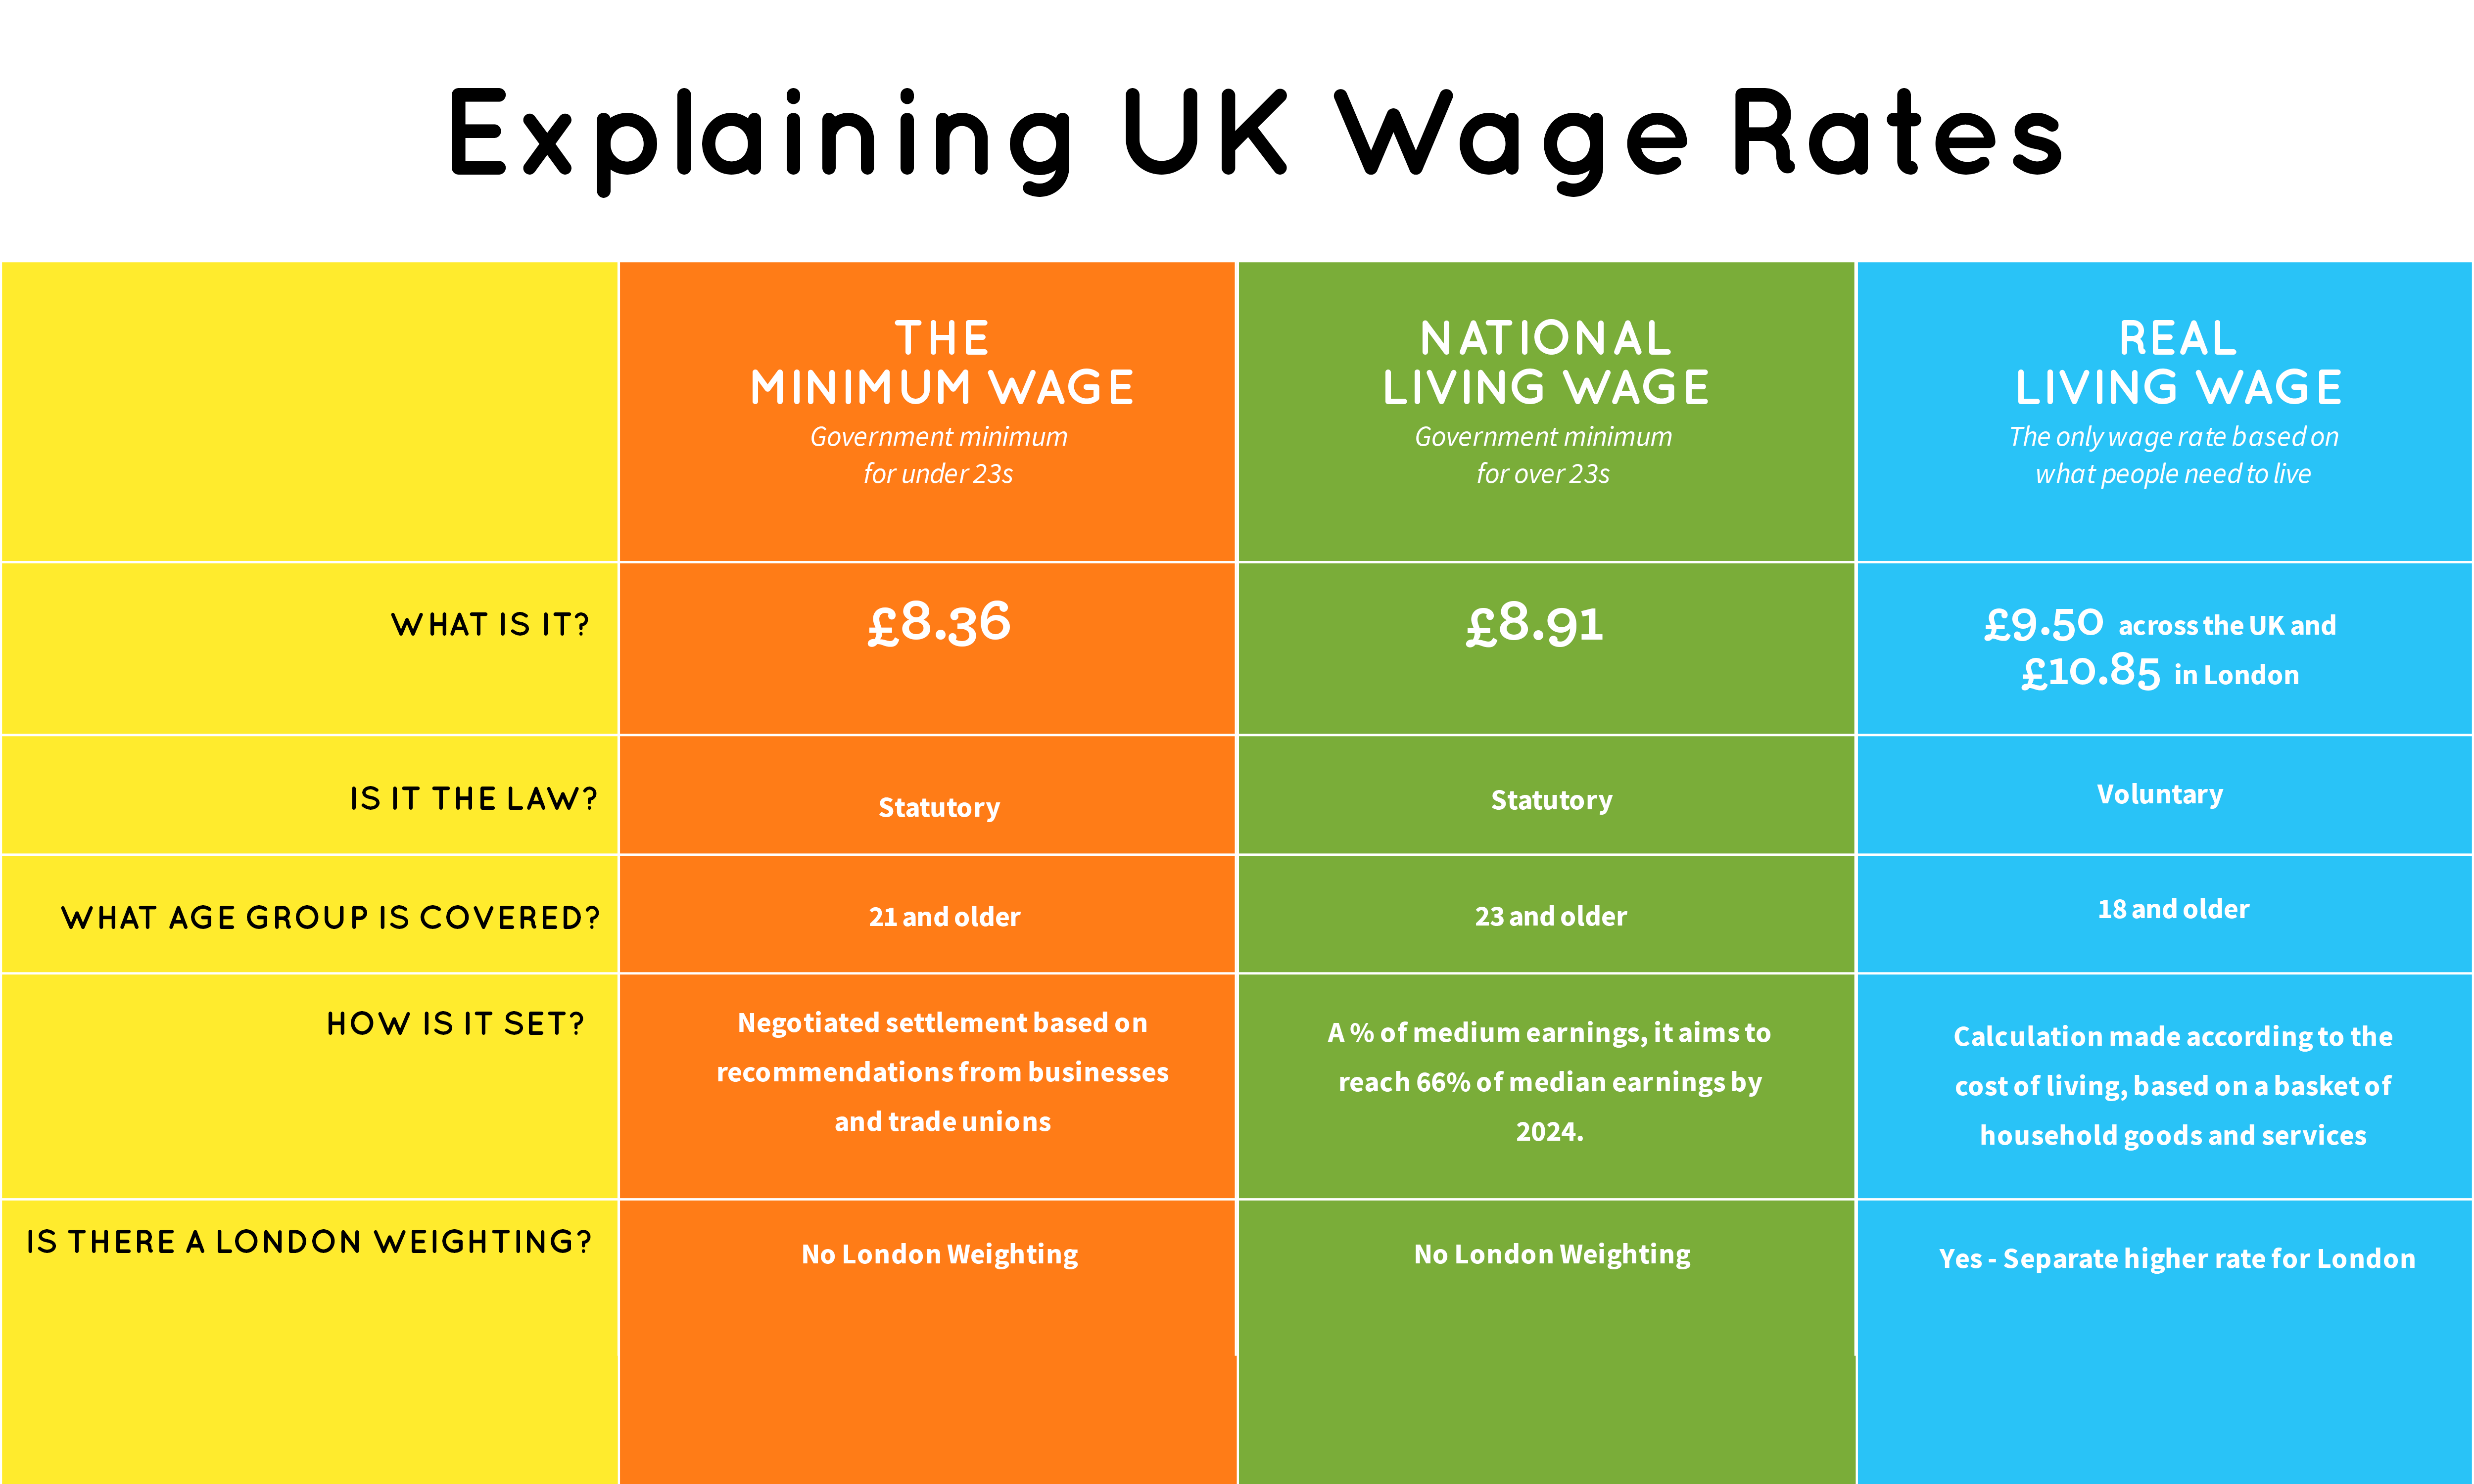 Comparing the UK minimum wage to the government living wage minimum and the real living wage rate